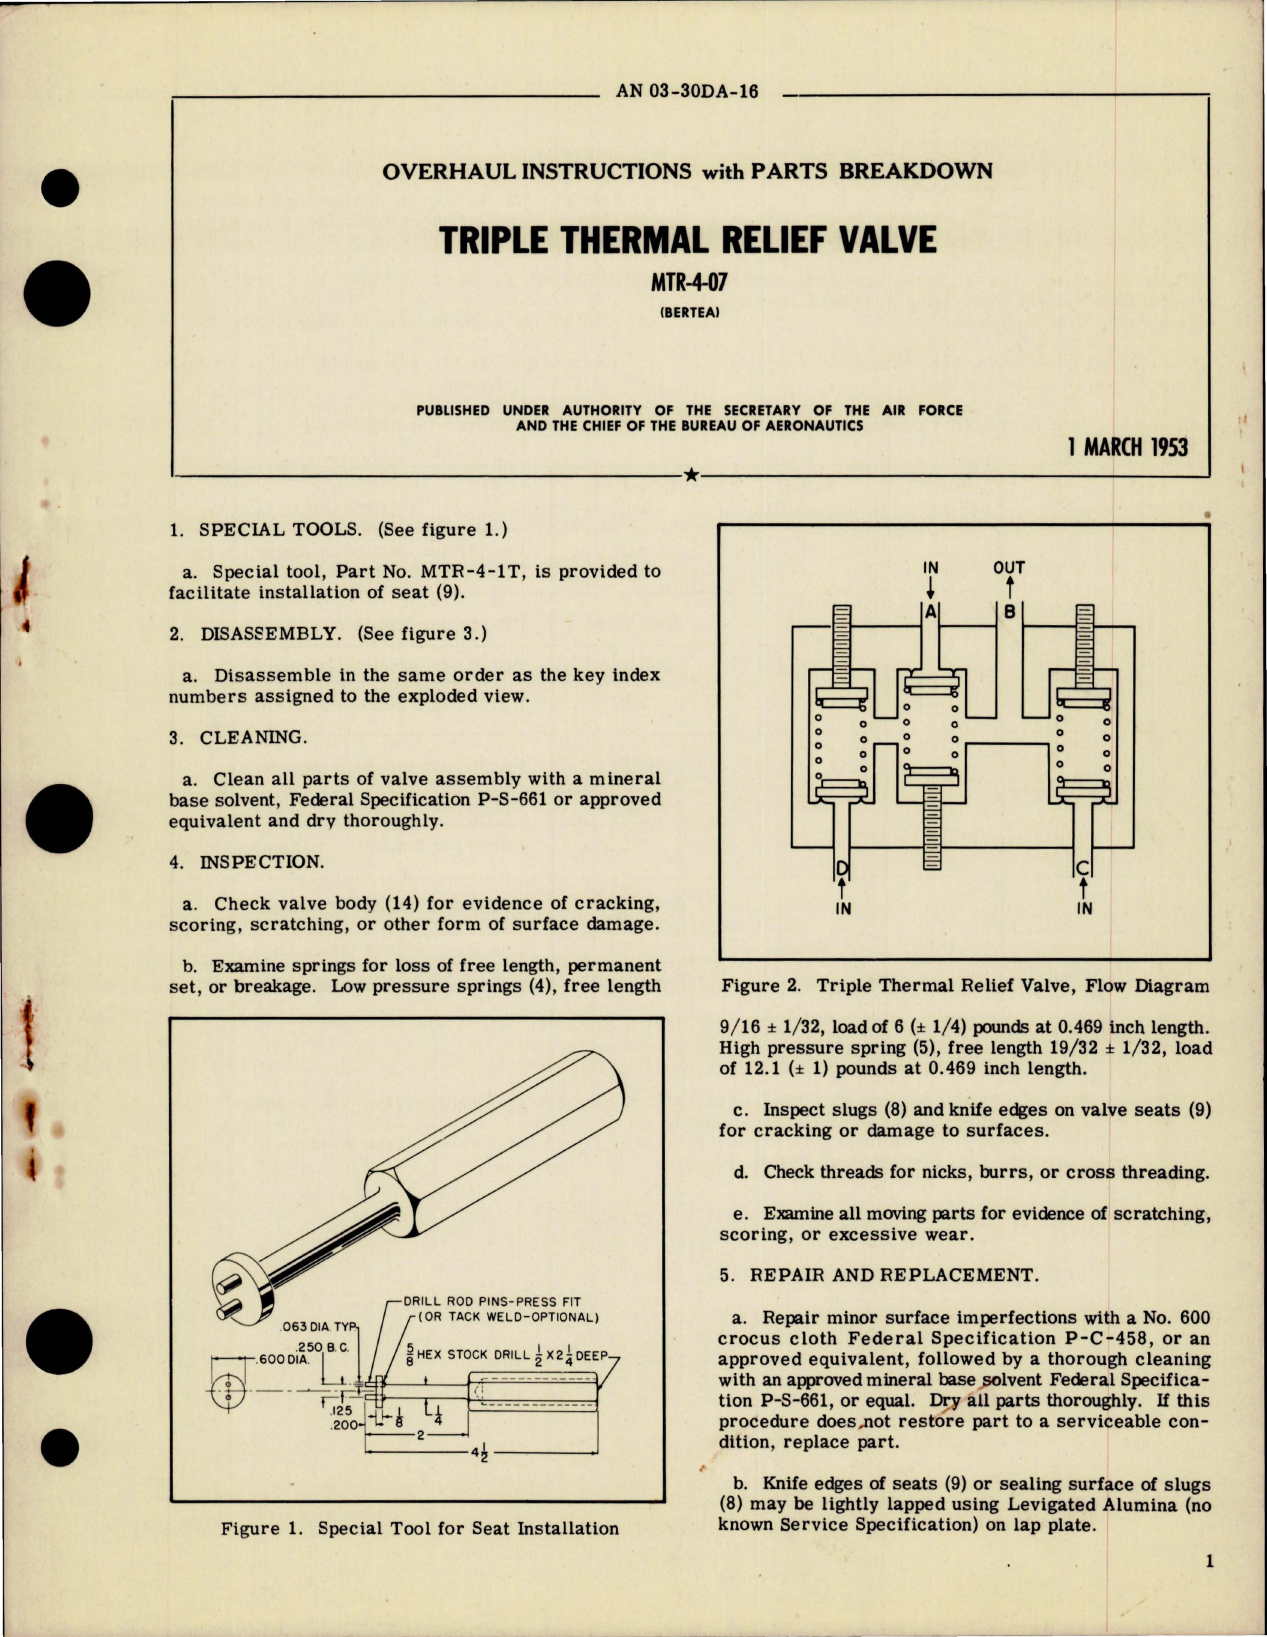 Sample page 1 from AirCorps Library document: Overhaul Instructions with Parts Breakdown for Triple Thermal Relief Valve - MTR-4-07 